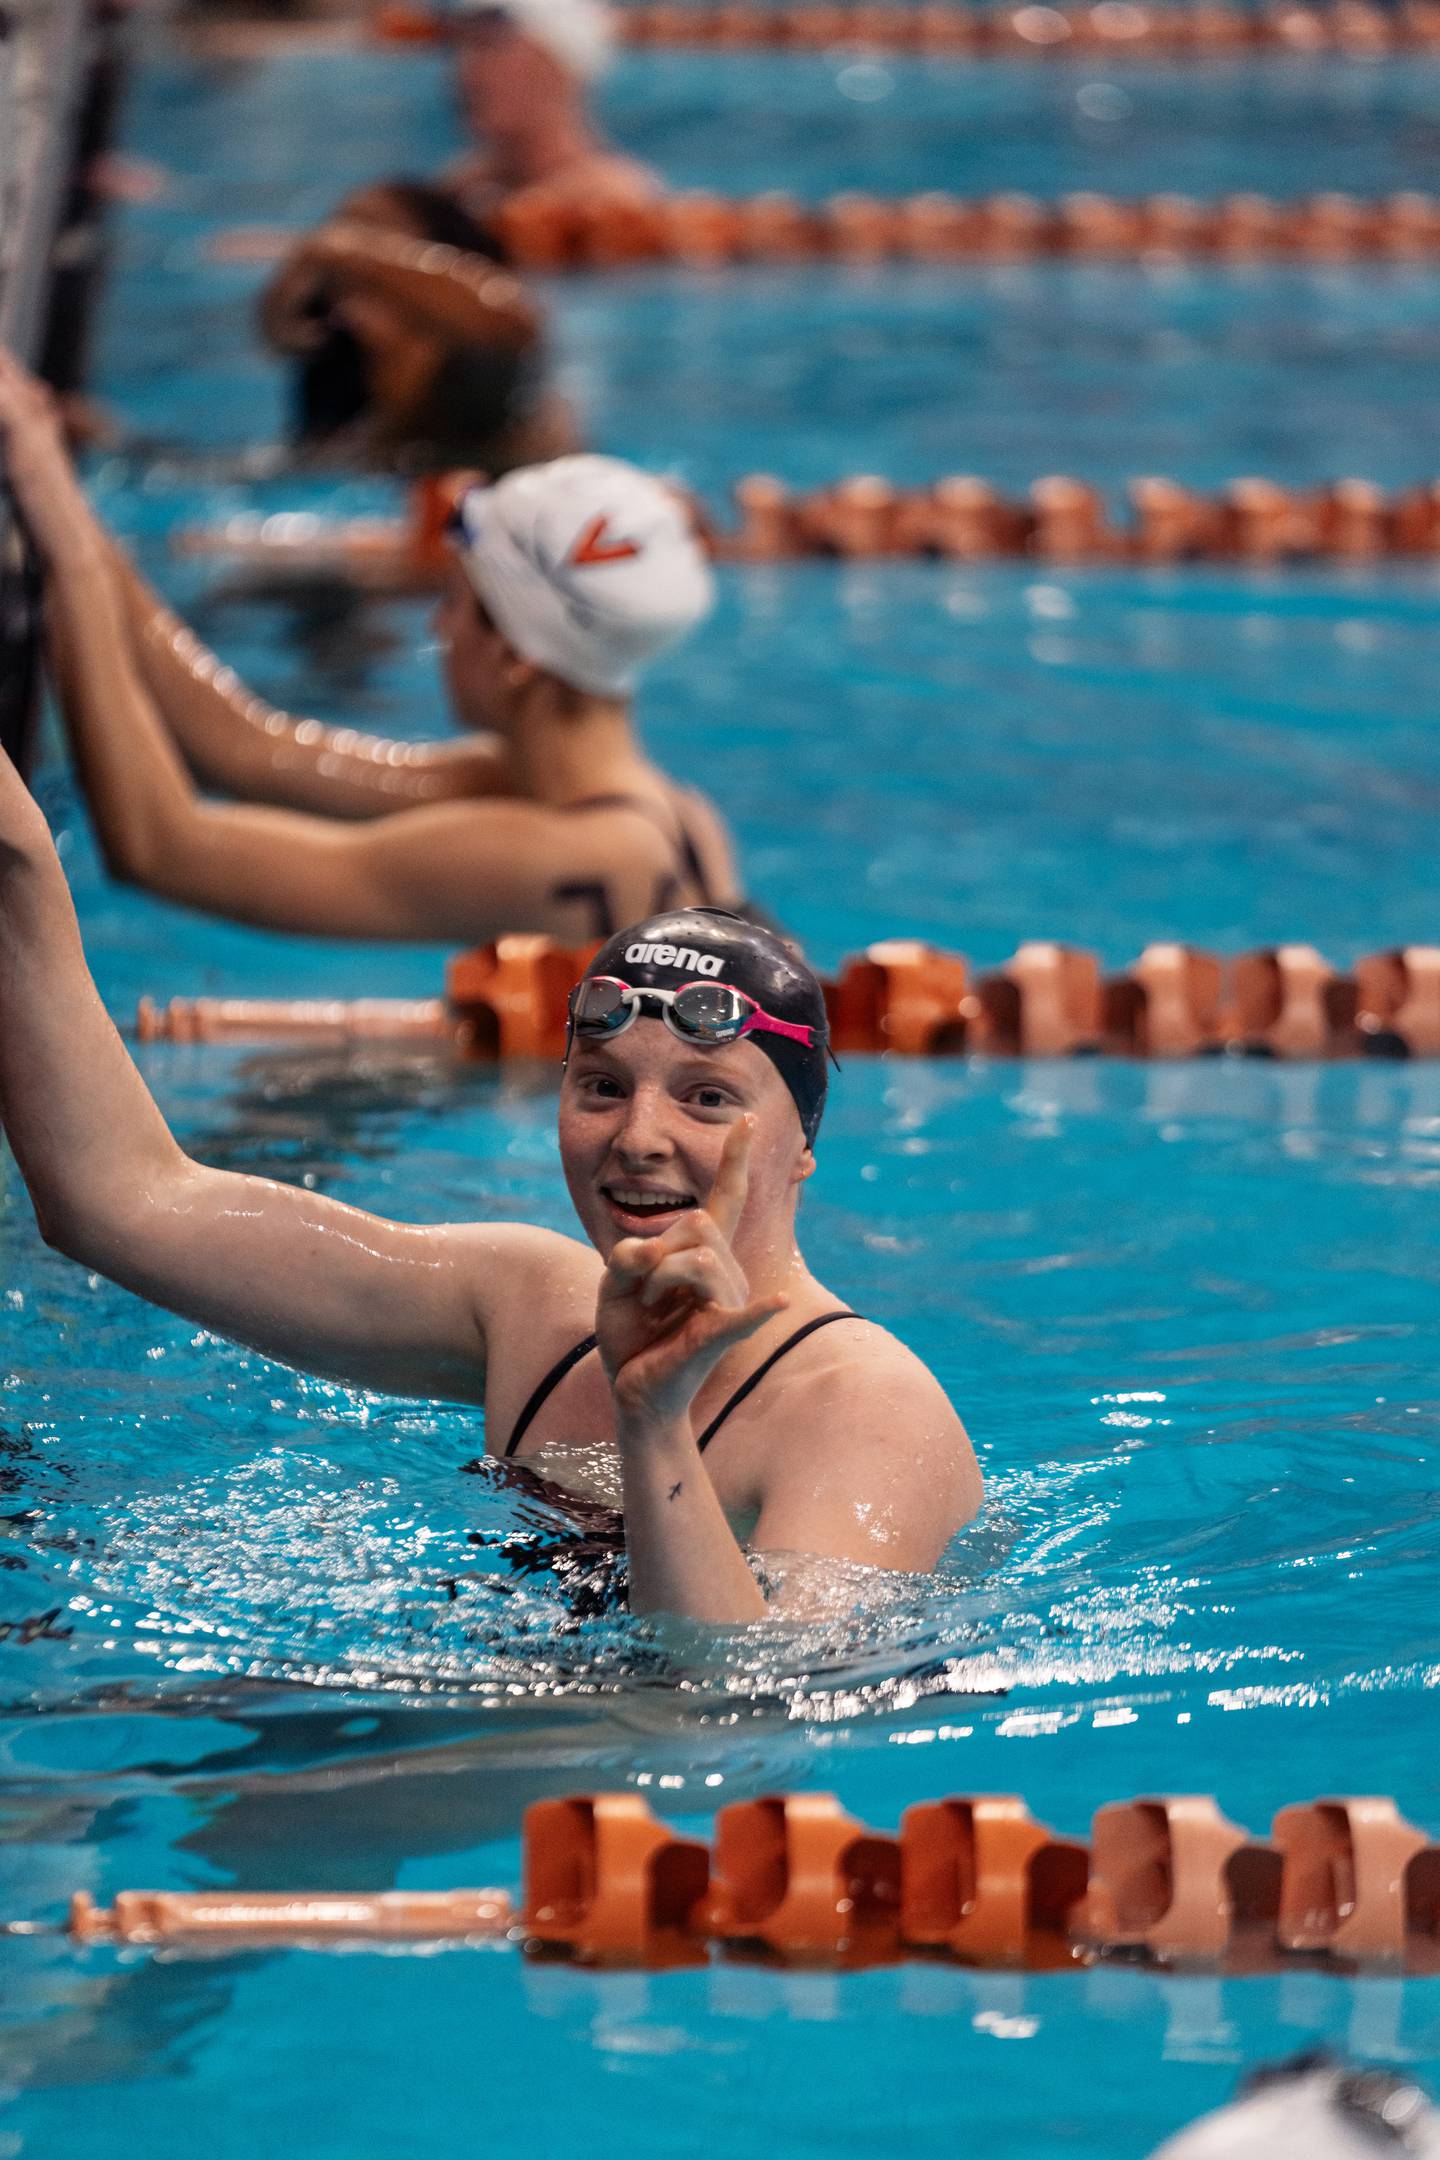 University of Texas swimmer Lydia Jacoby